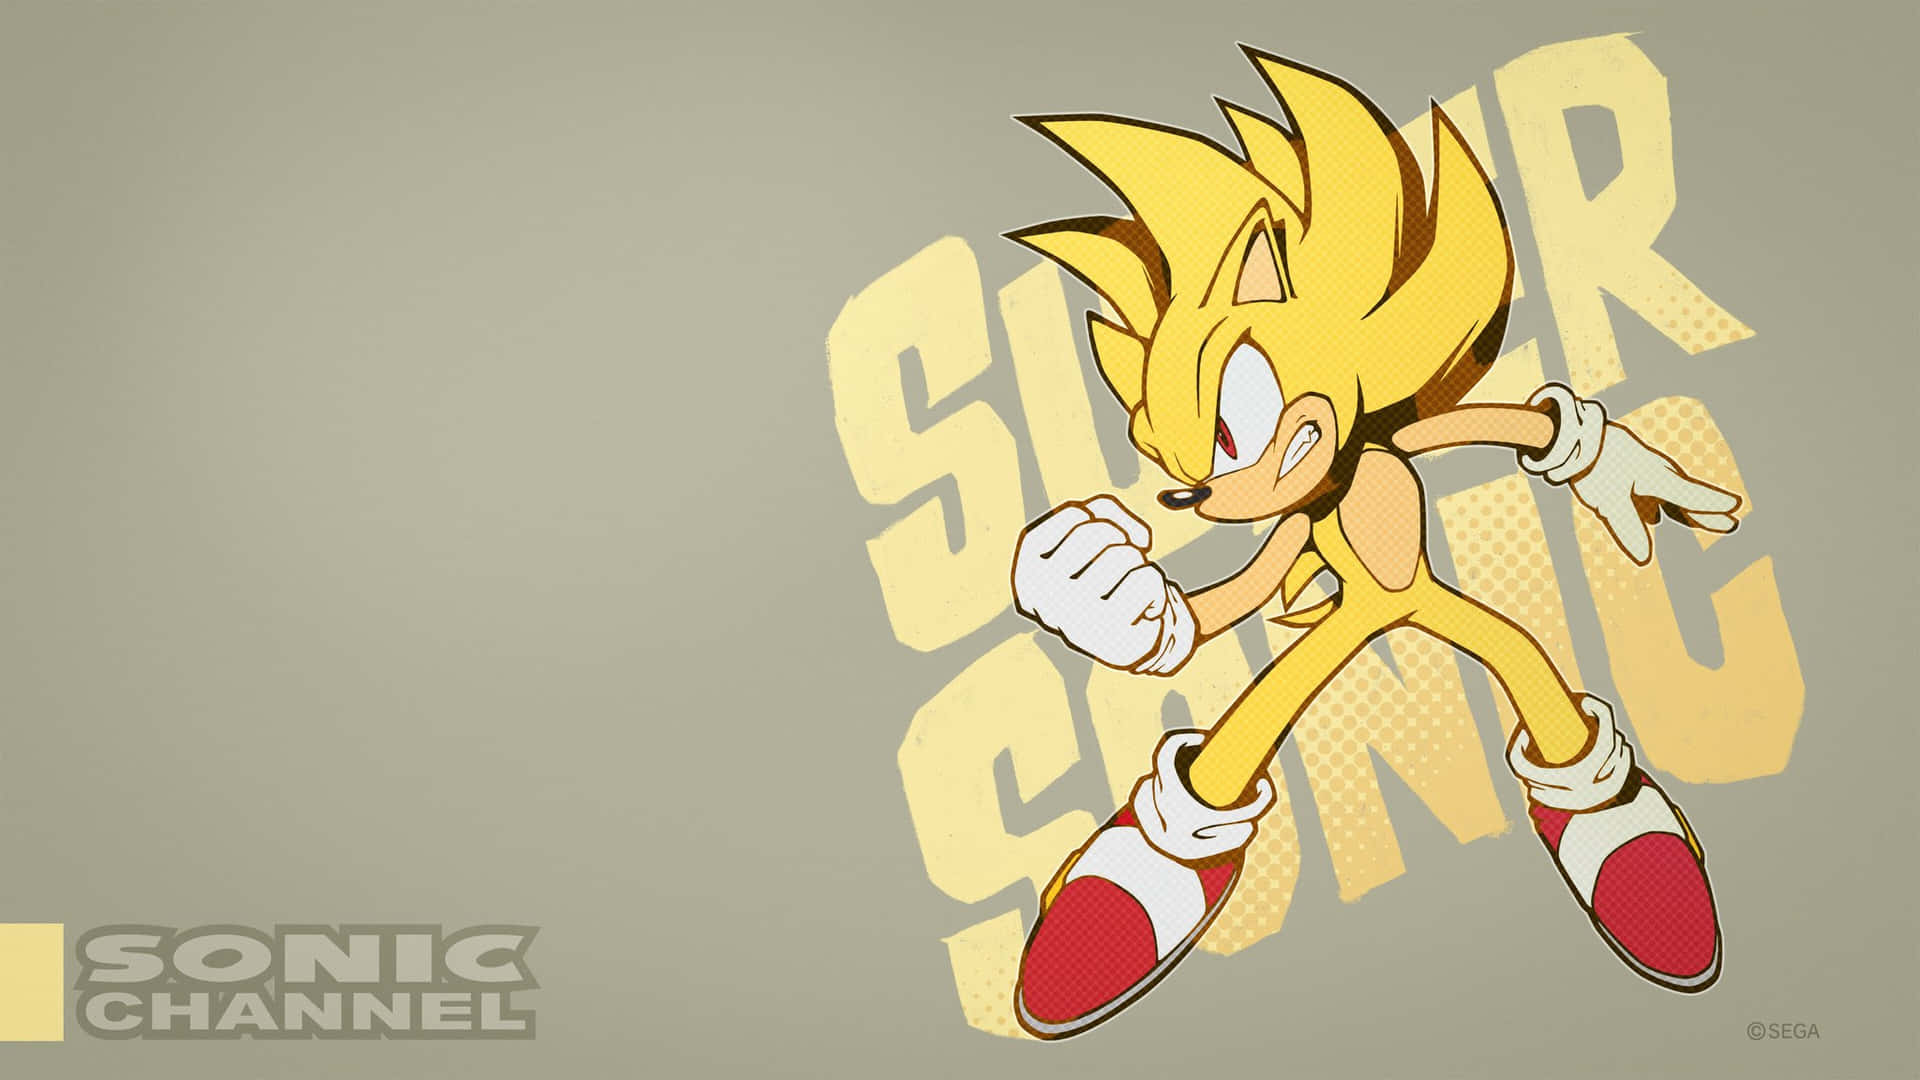 “Catch up to faster than the speed of sound with Super Sonic” Wallpaper